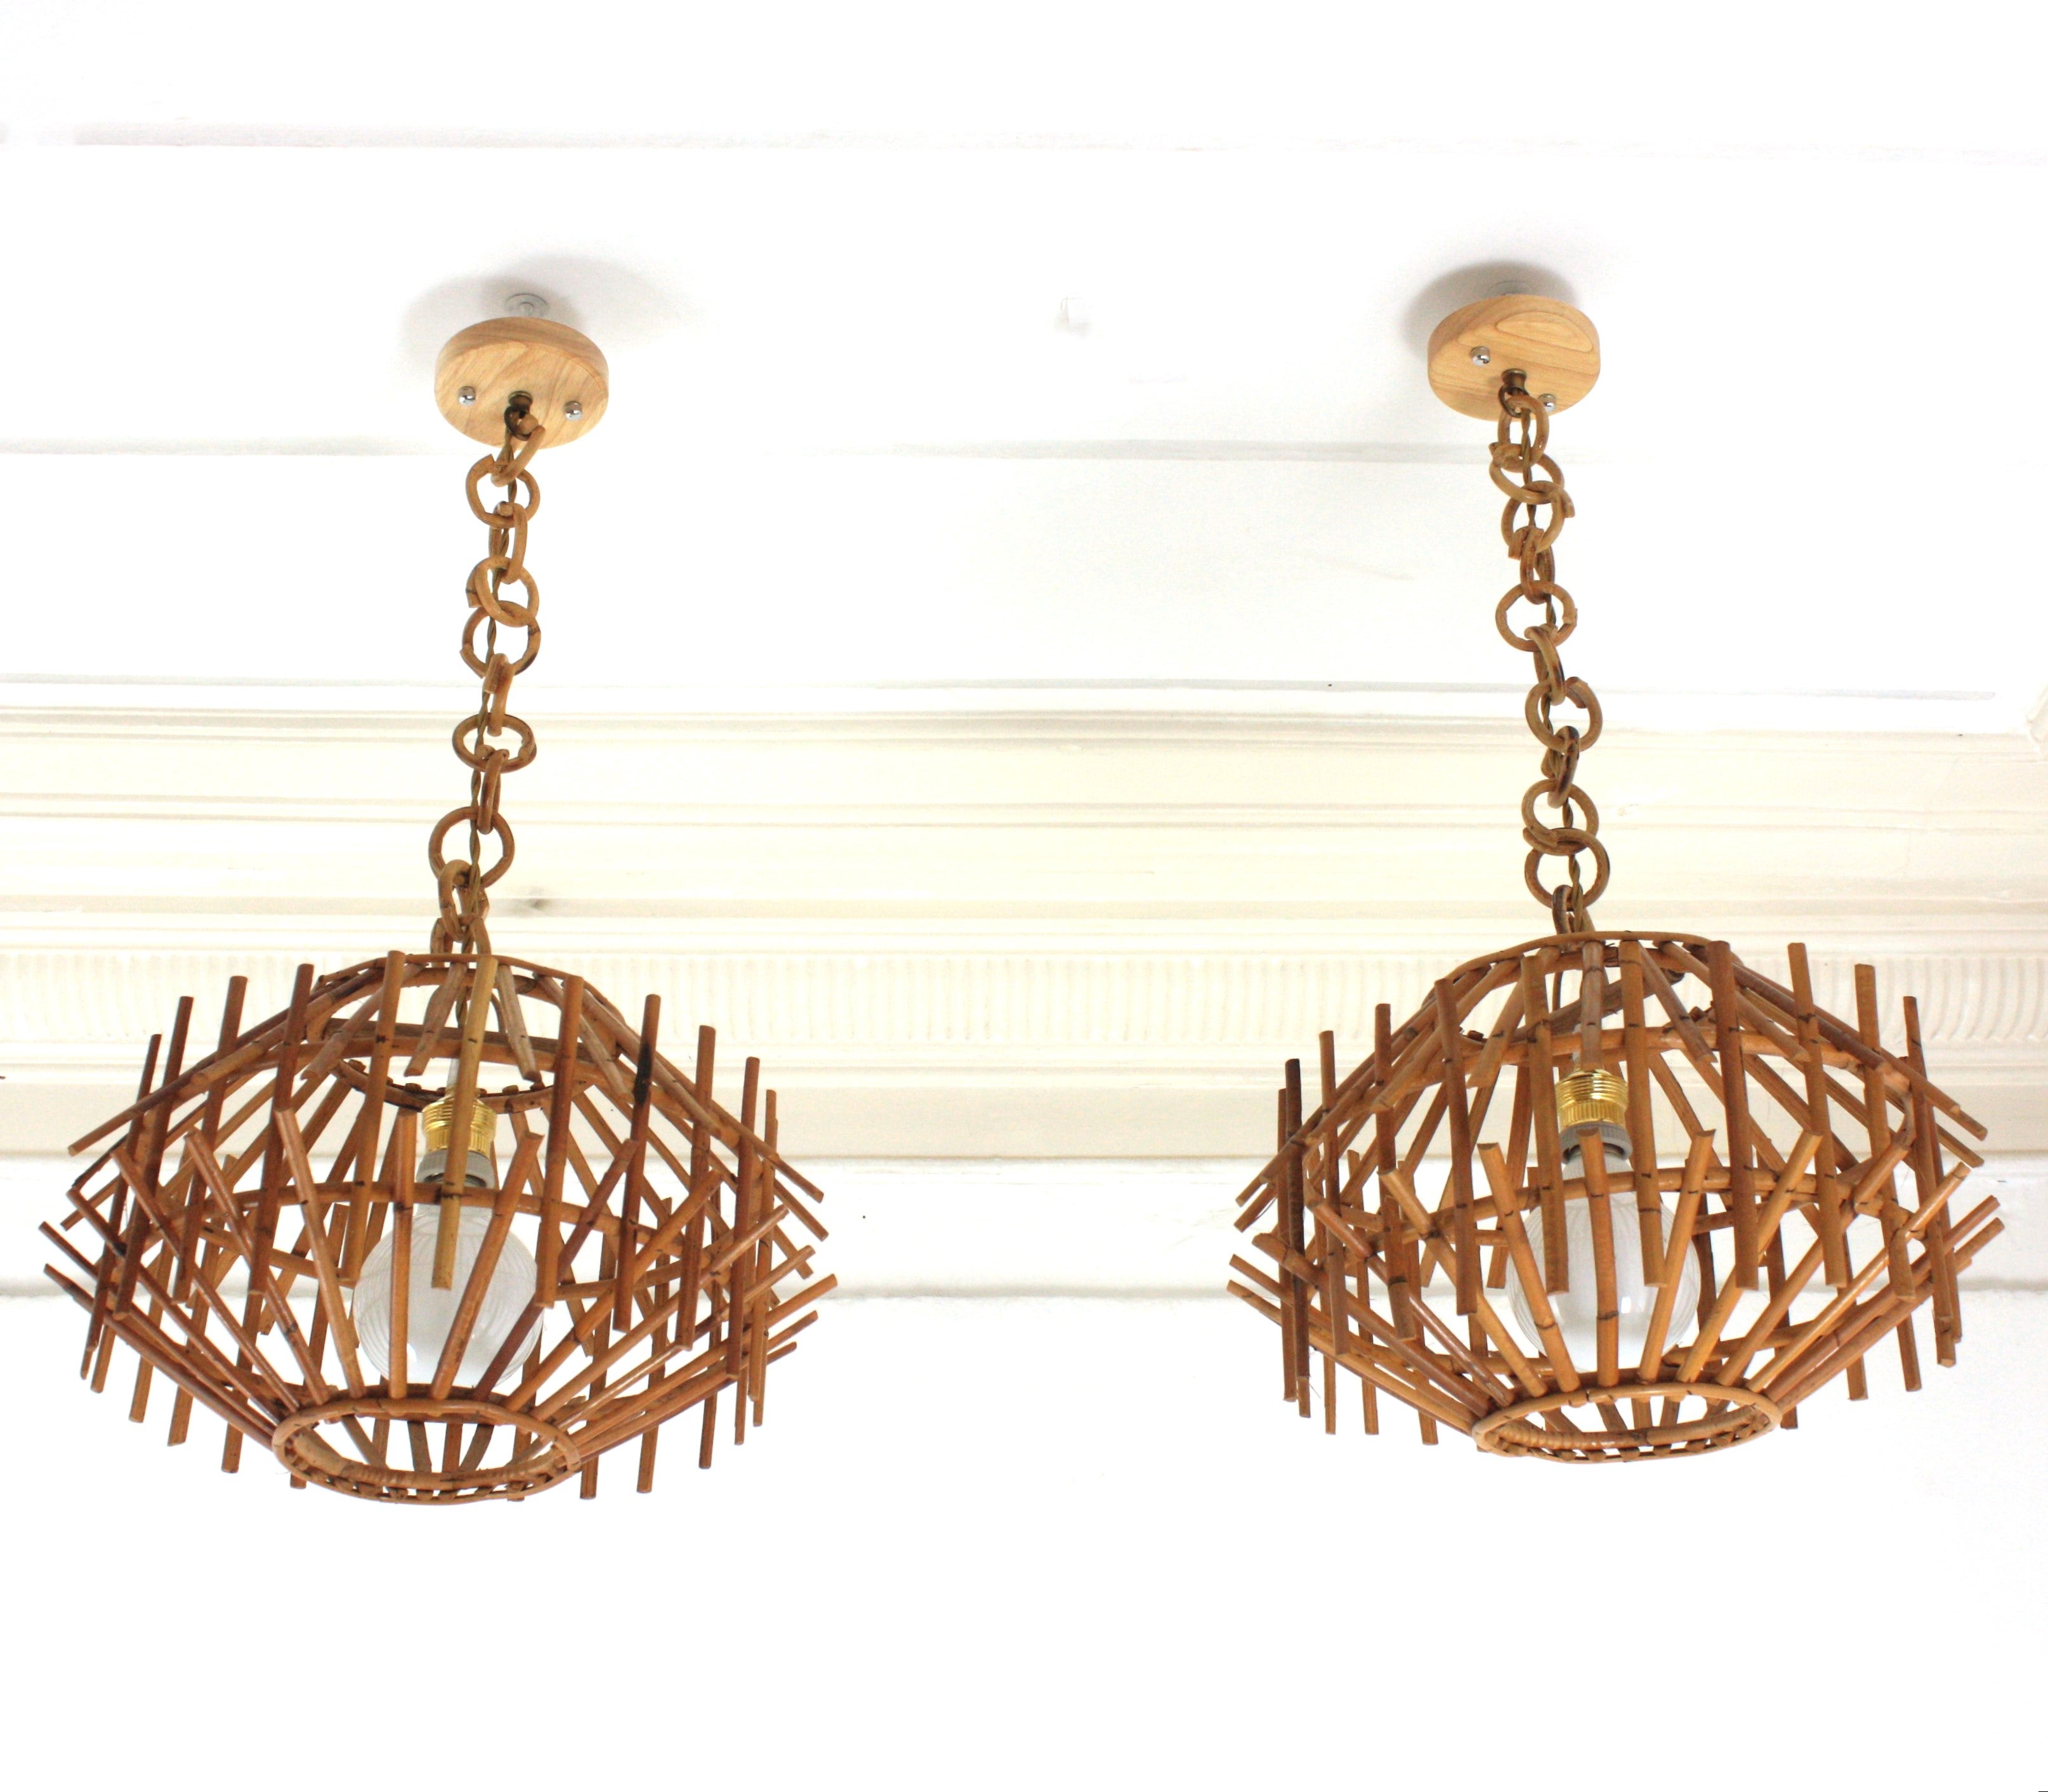 Pair of rattan suspension lamps / lanterns with oriental inspired design. France, 1960s
Eye-catching pair of rattan pagoda shaped rattan pendants. Entirely made by hand. Beautifully designed combining chinoiserie and Midentury style. The lampshades